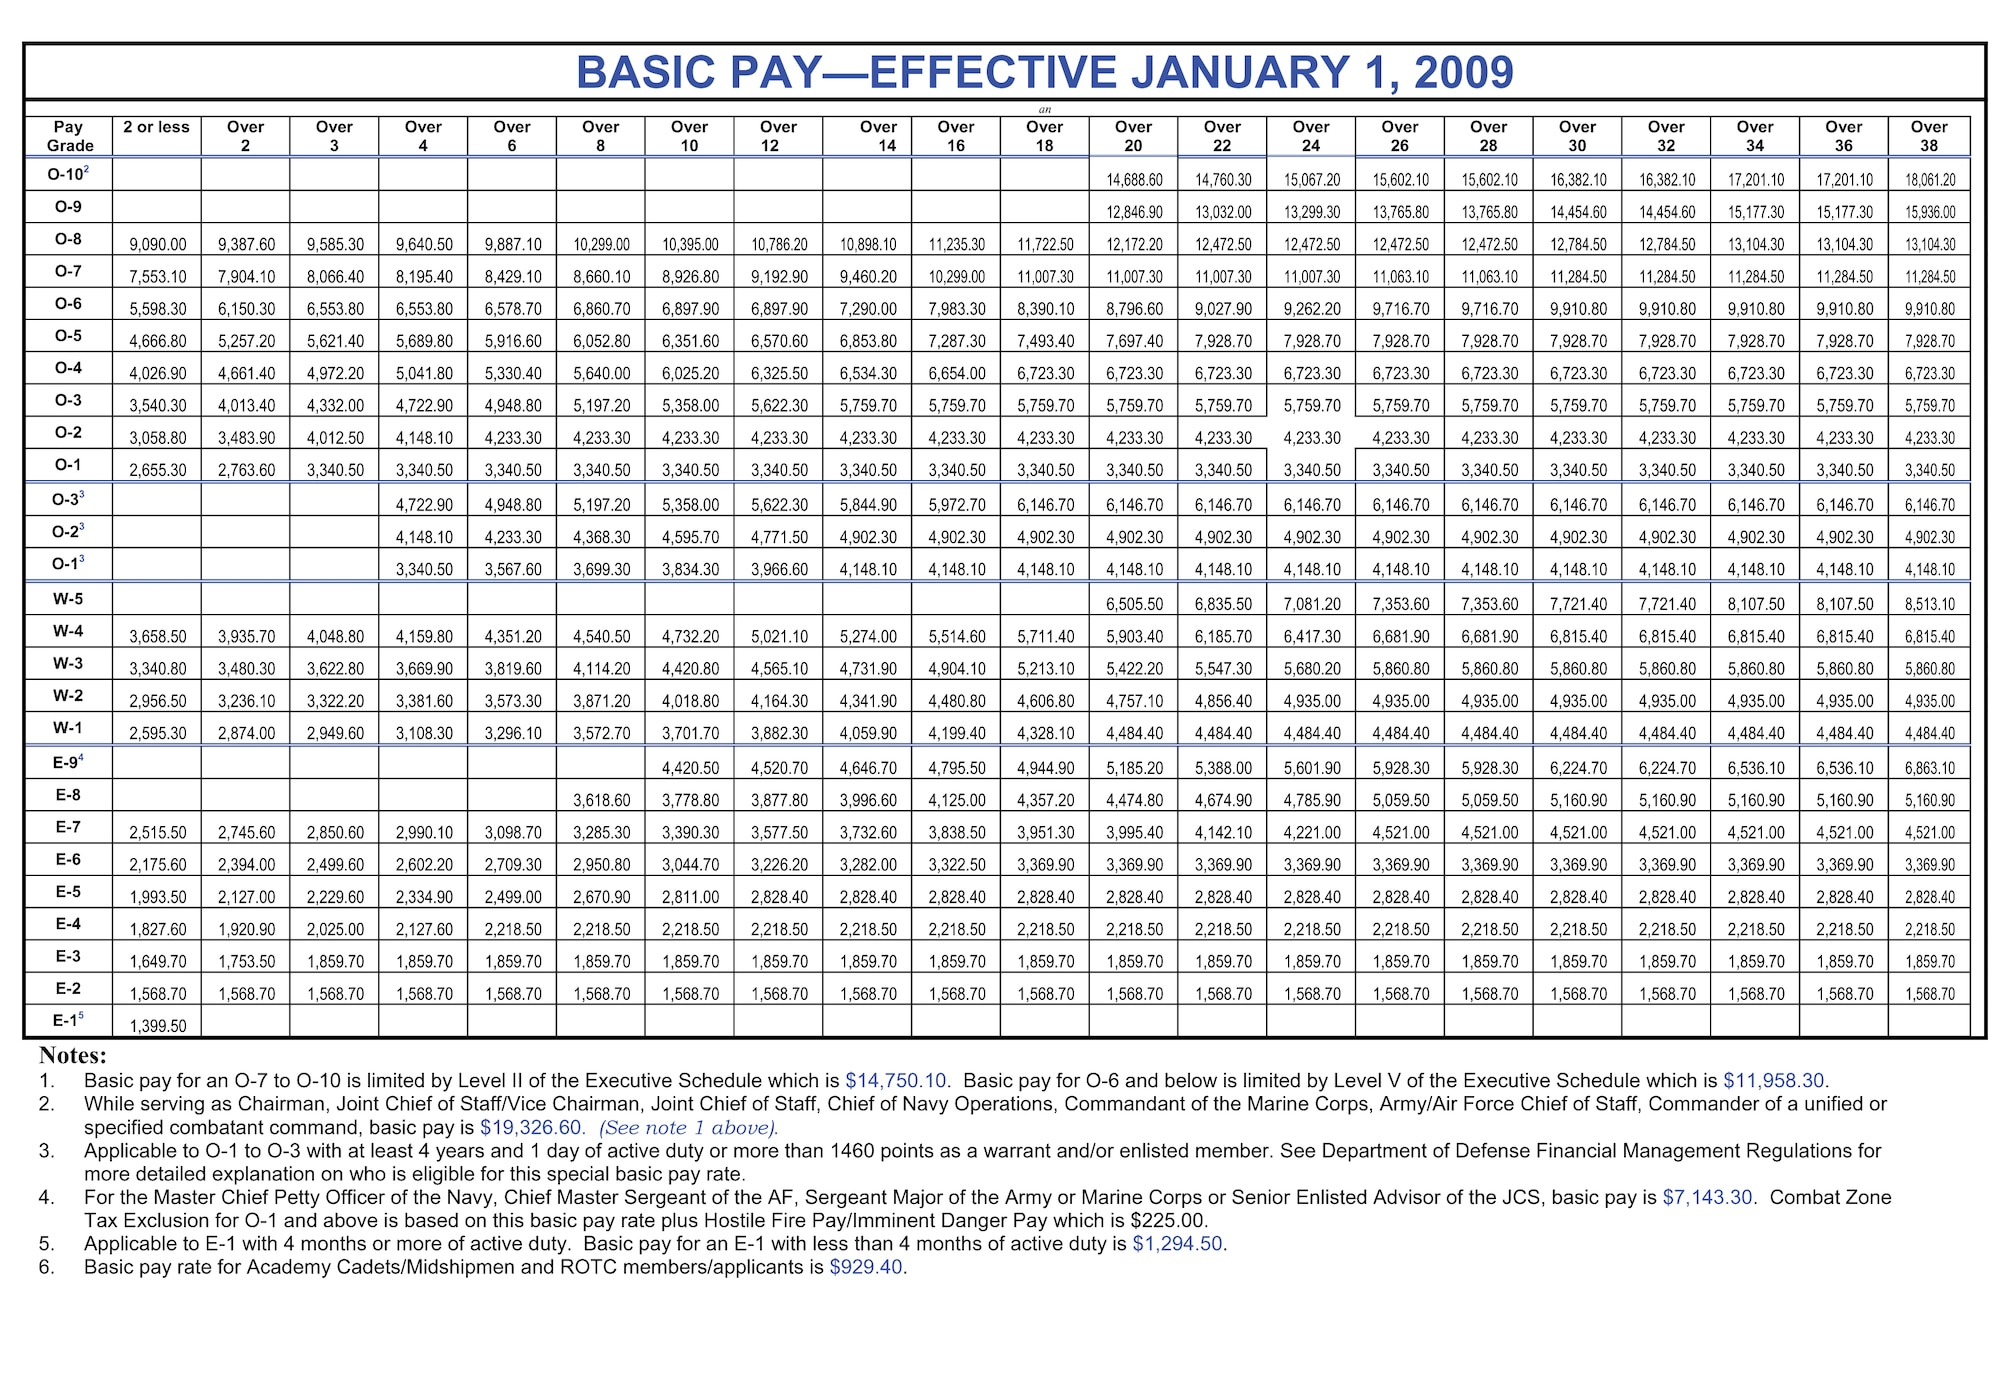 2009 basic military pay chart now in effect. (Courtesy of DFAS)